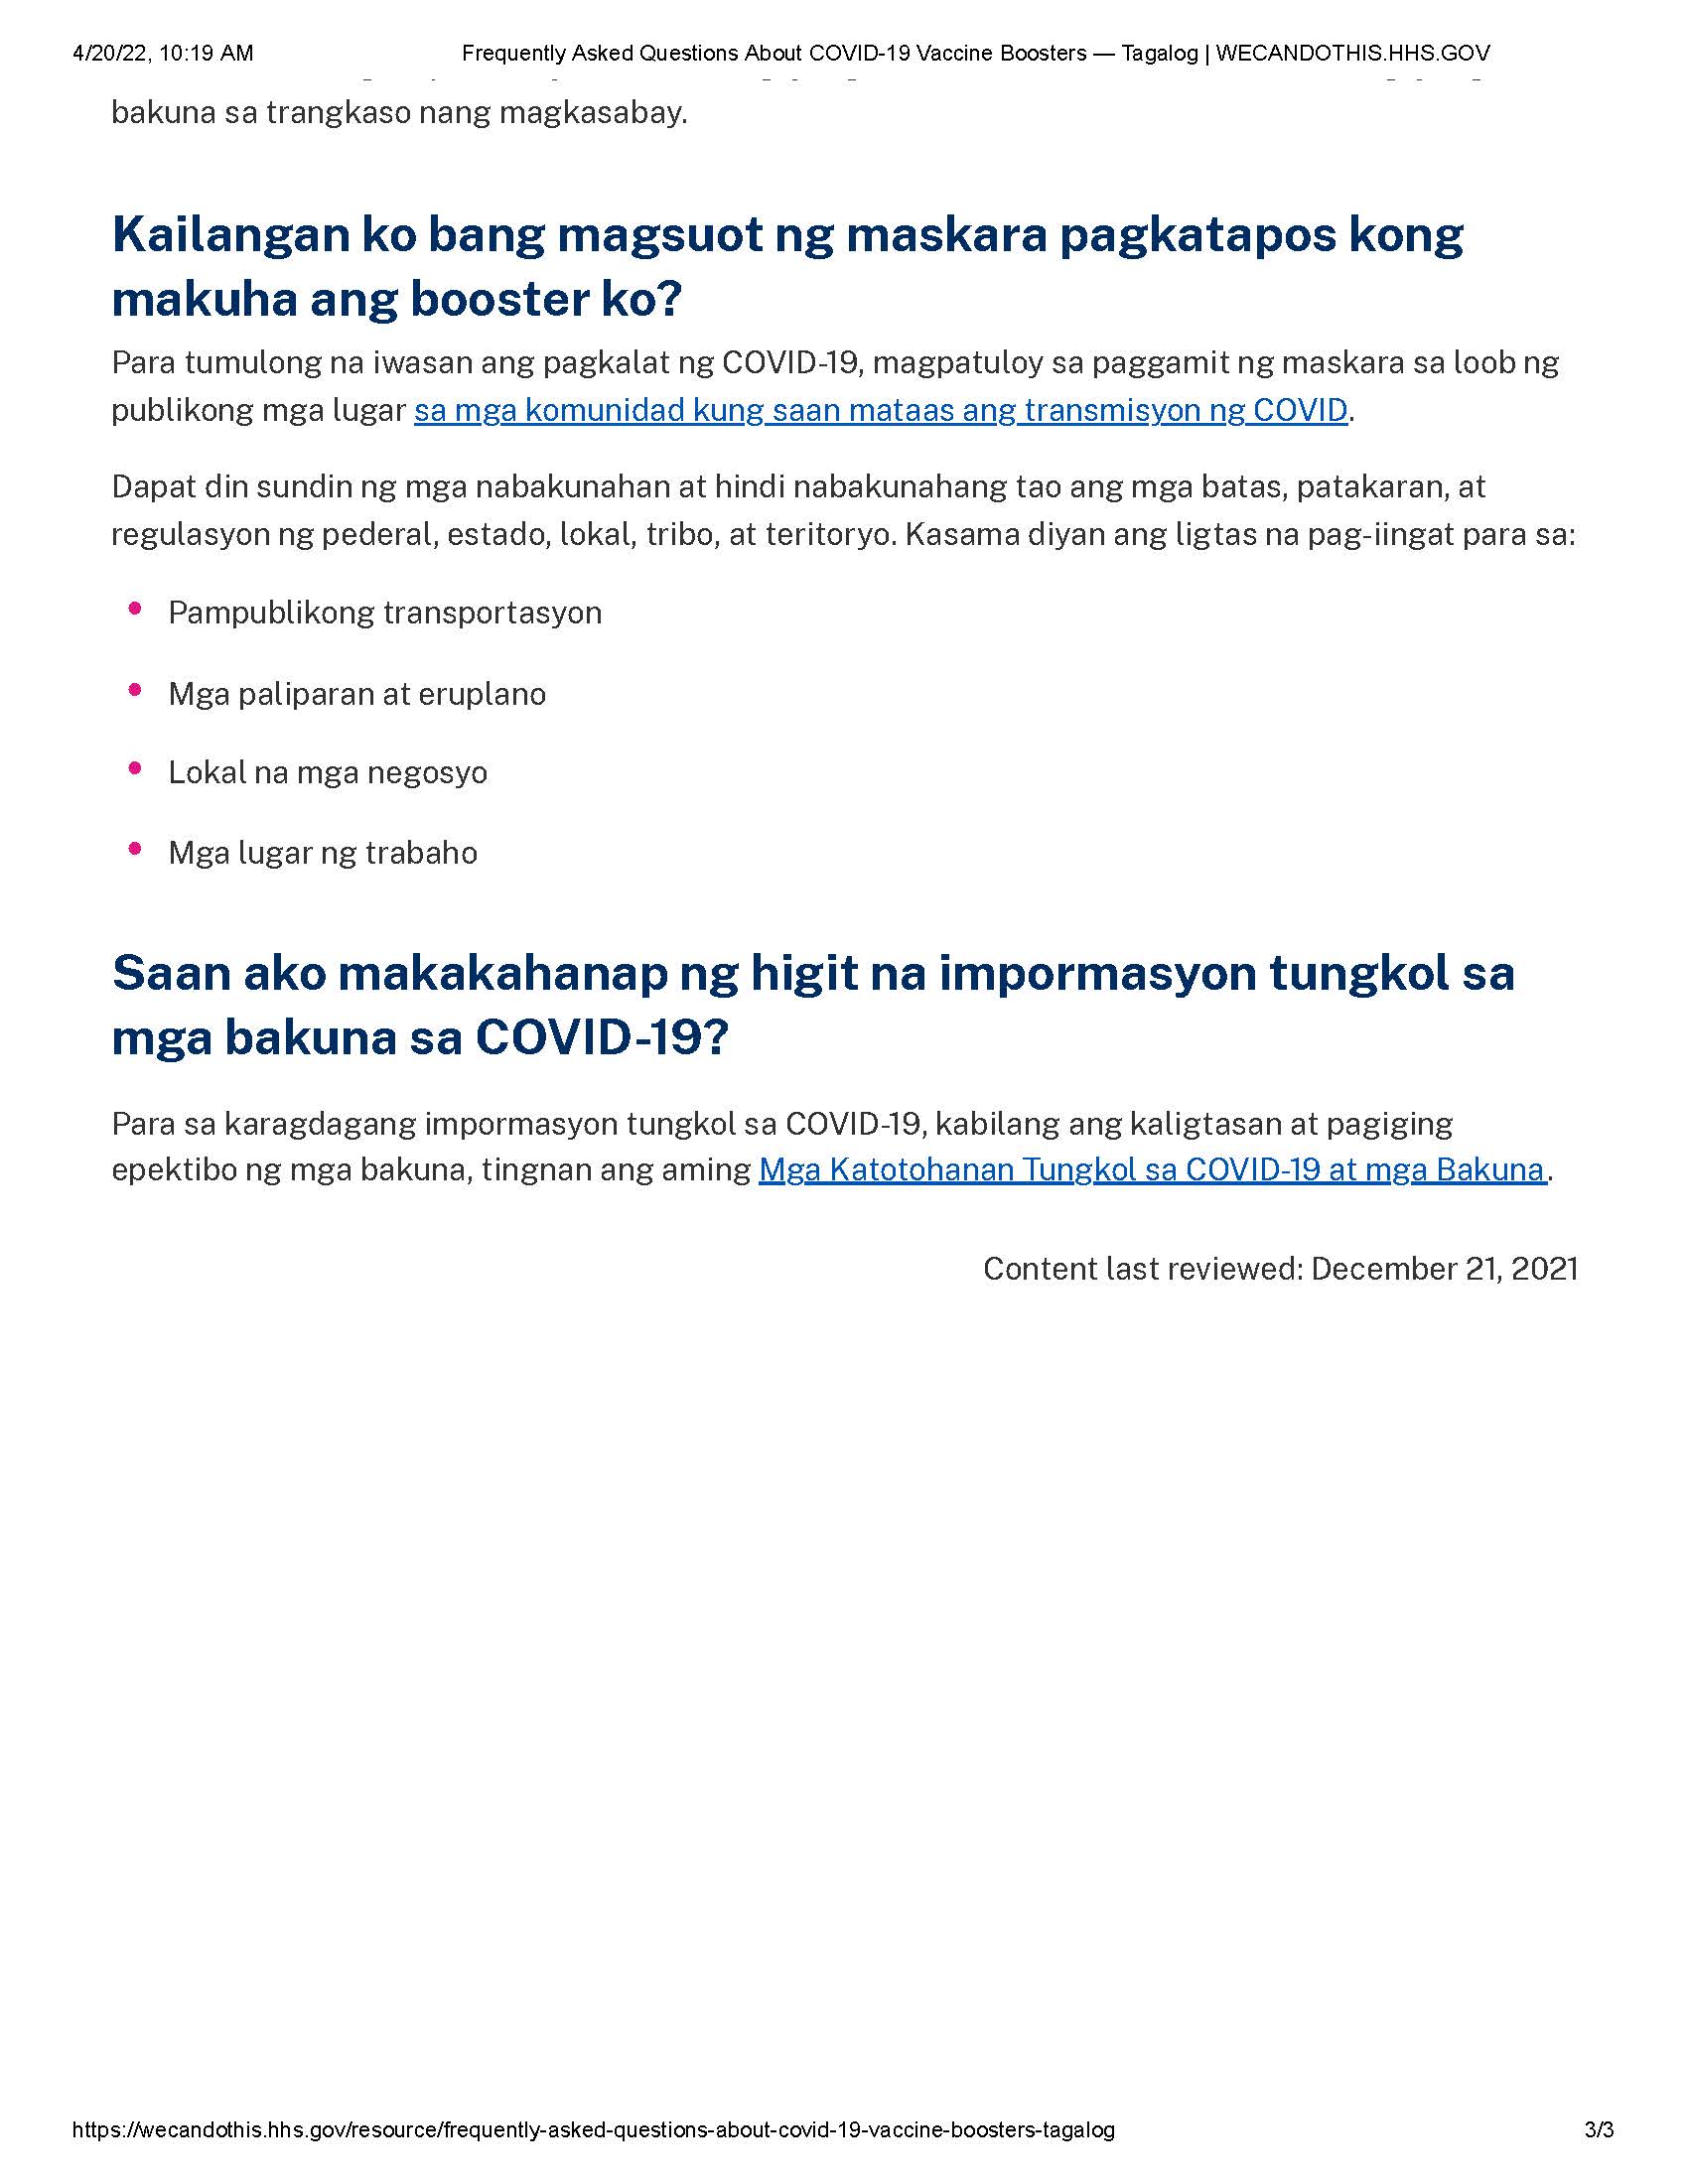 Frequently Asked Questions About COVID-19 Vaccine Boosters — Tagalog _ WECANDOTHIS.HHS.GOV_Page_3